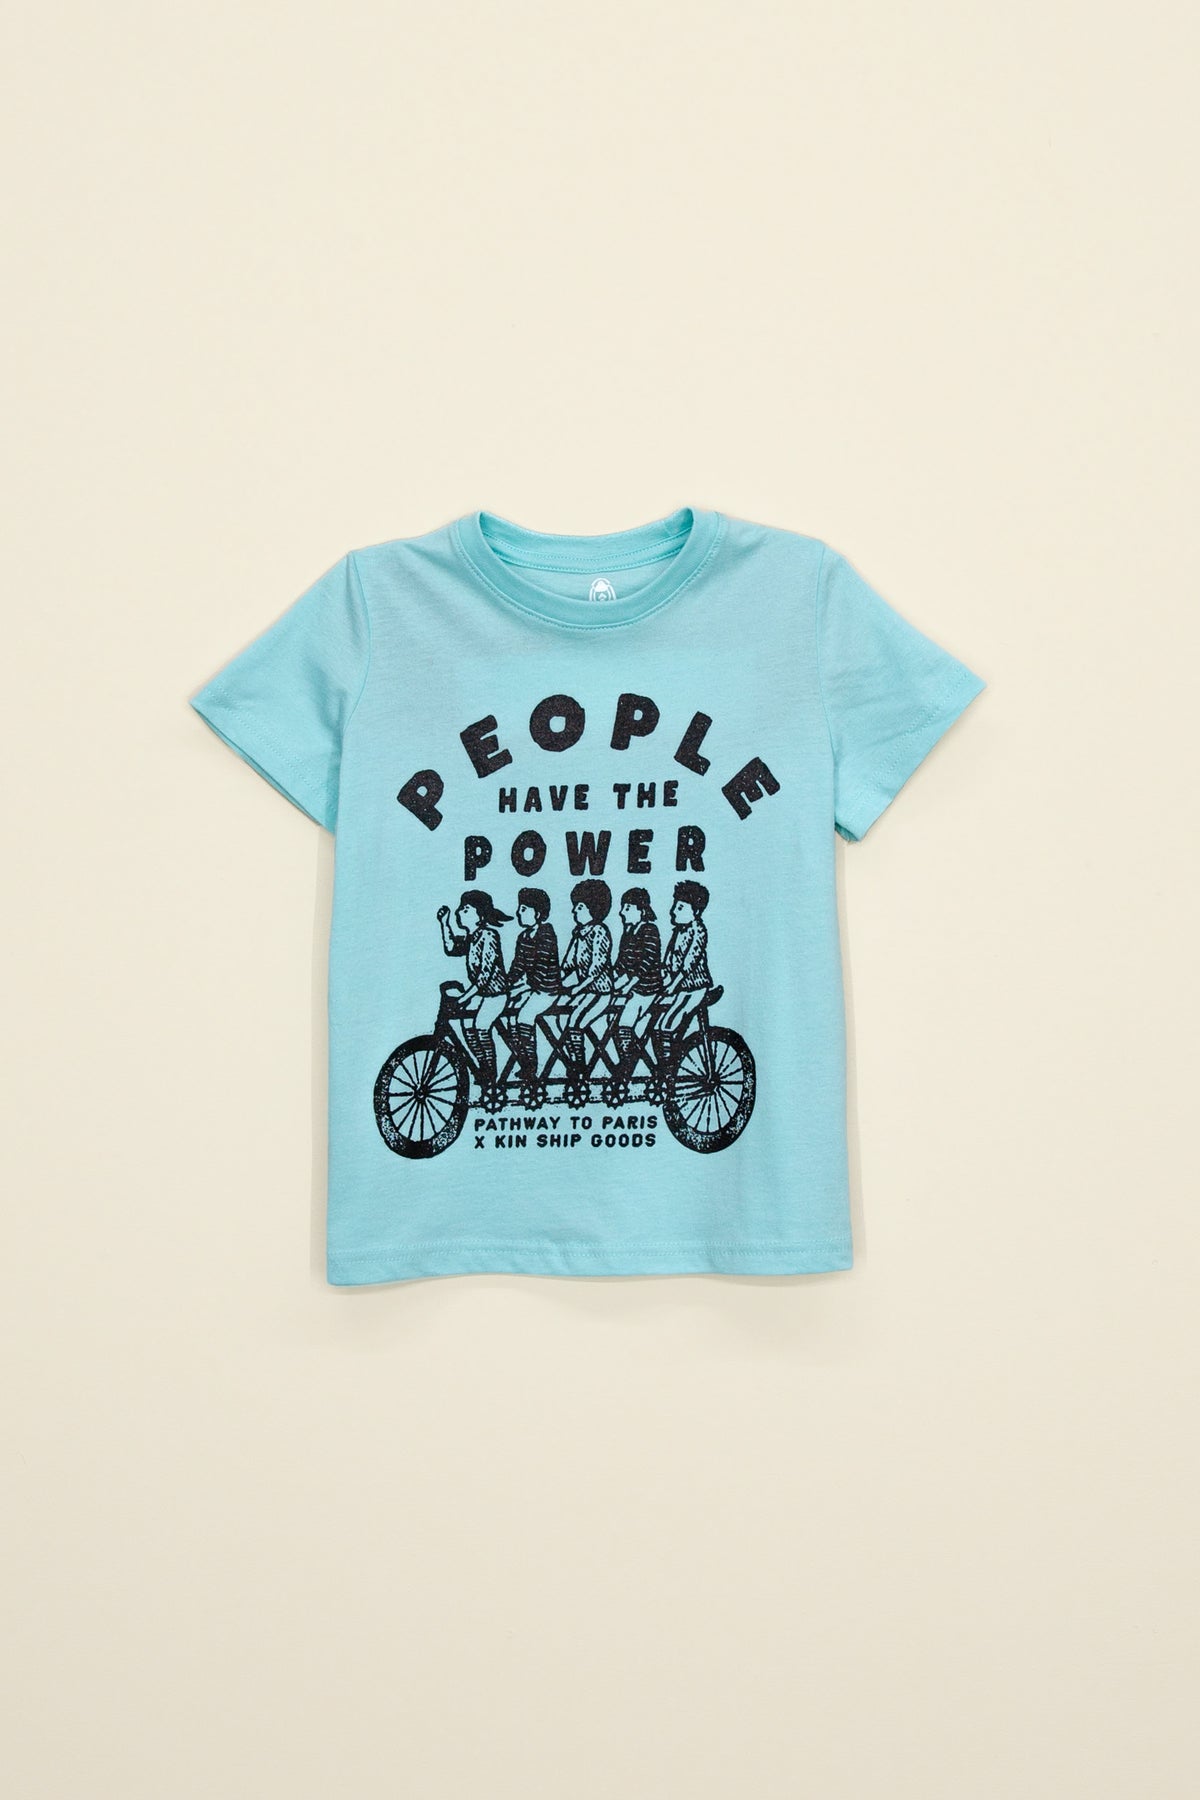 people have the power kids tee